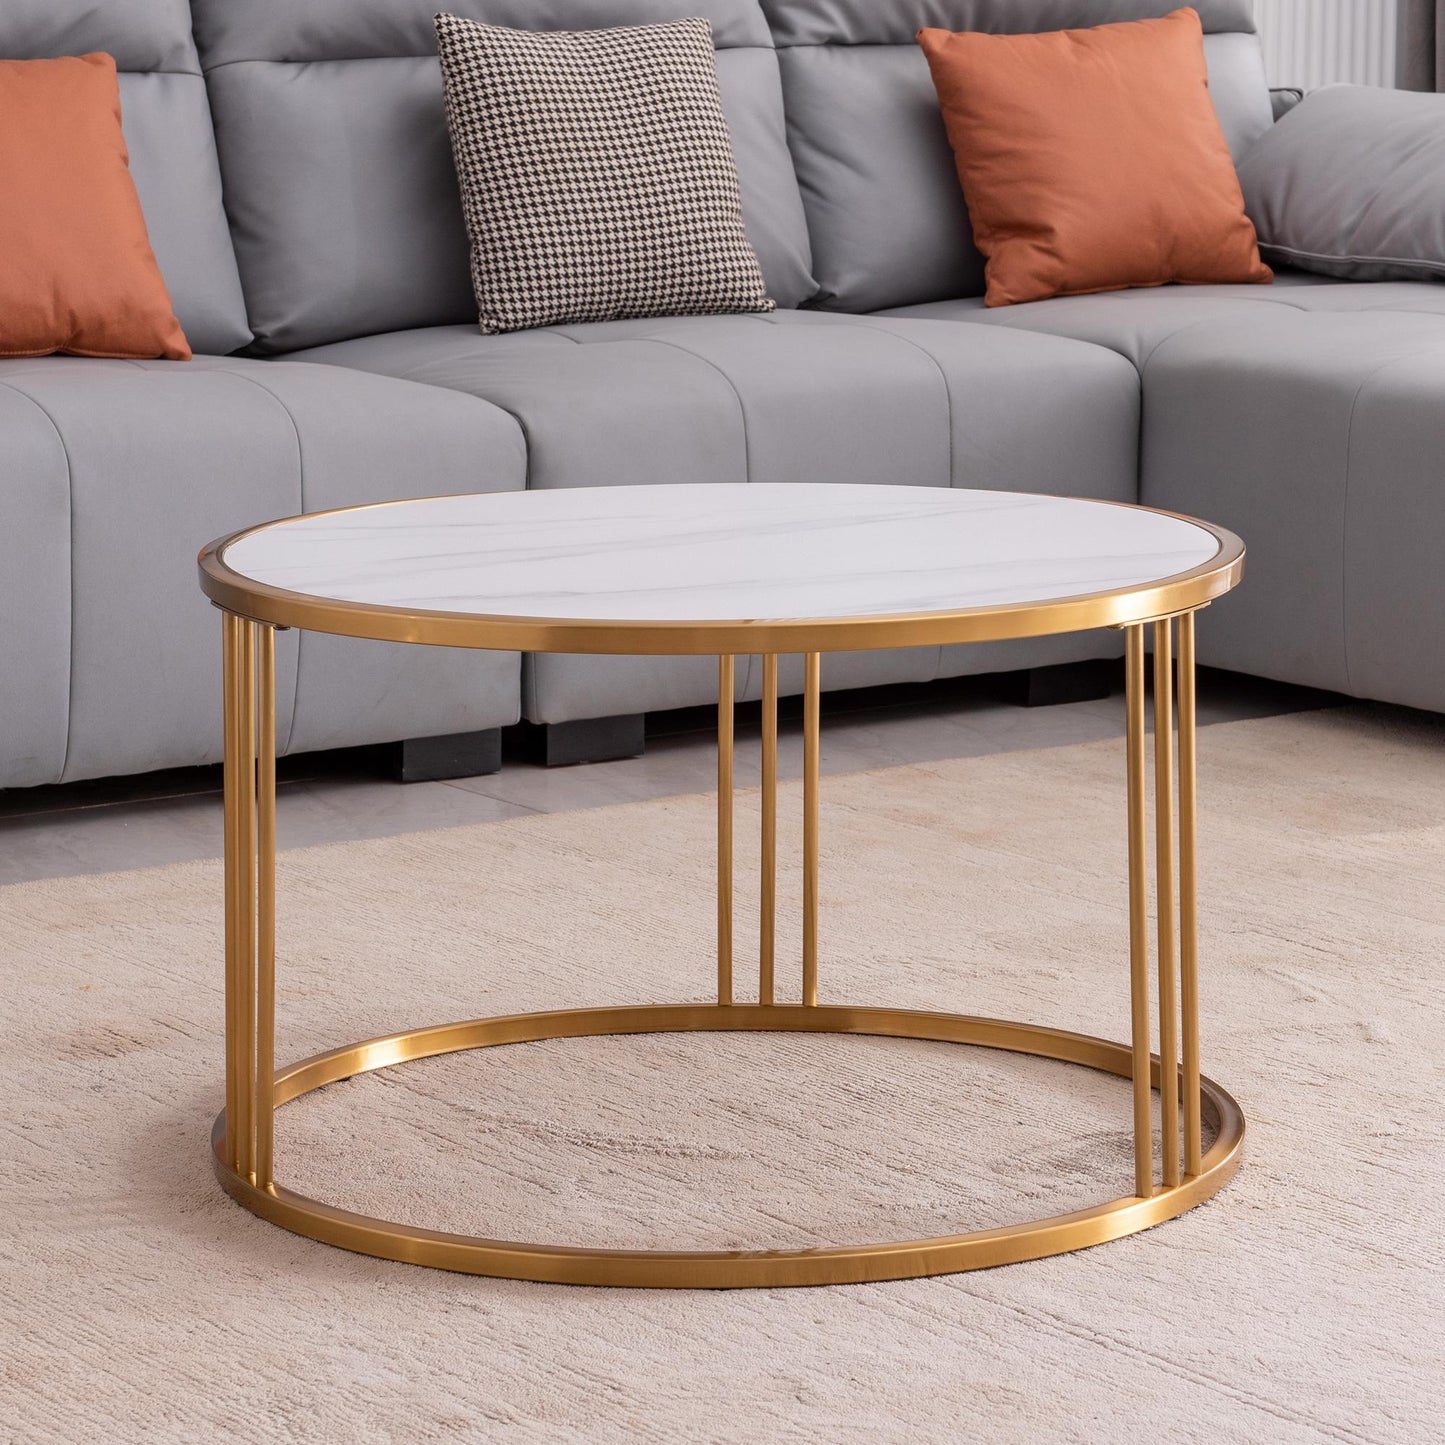 Slate round coffee table with golden stainless steel frame